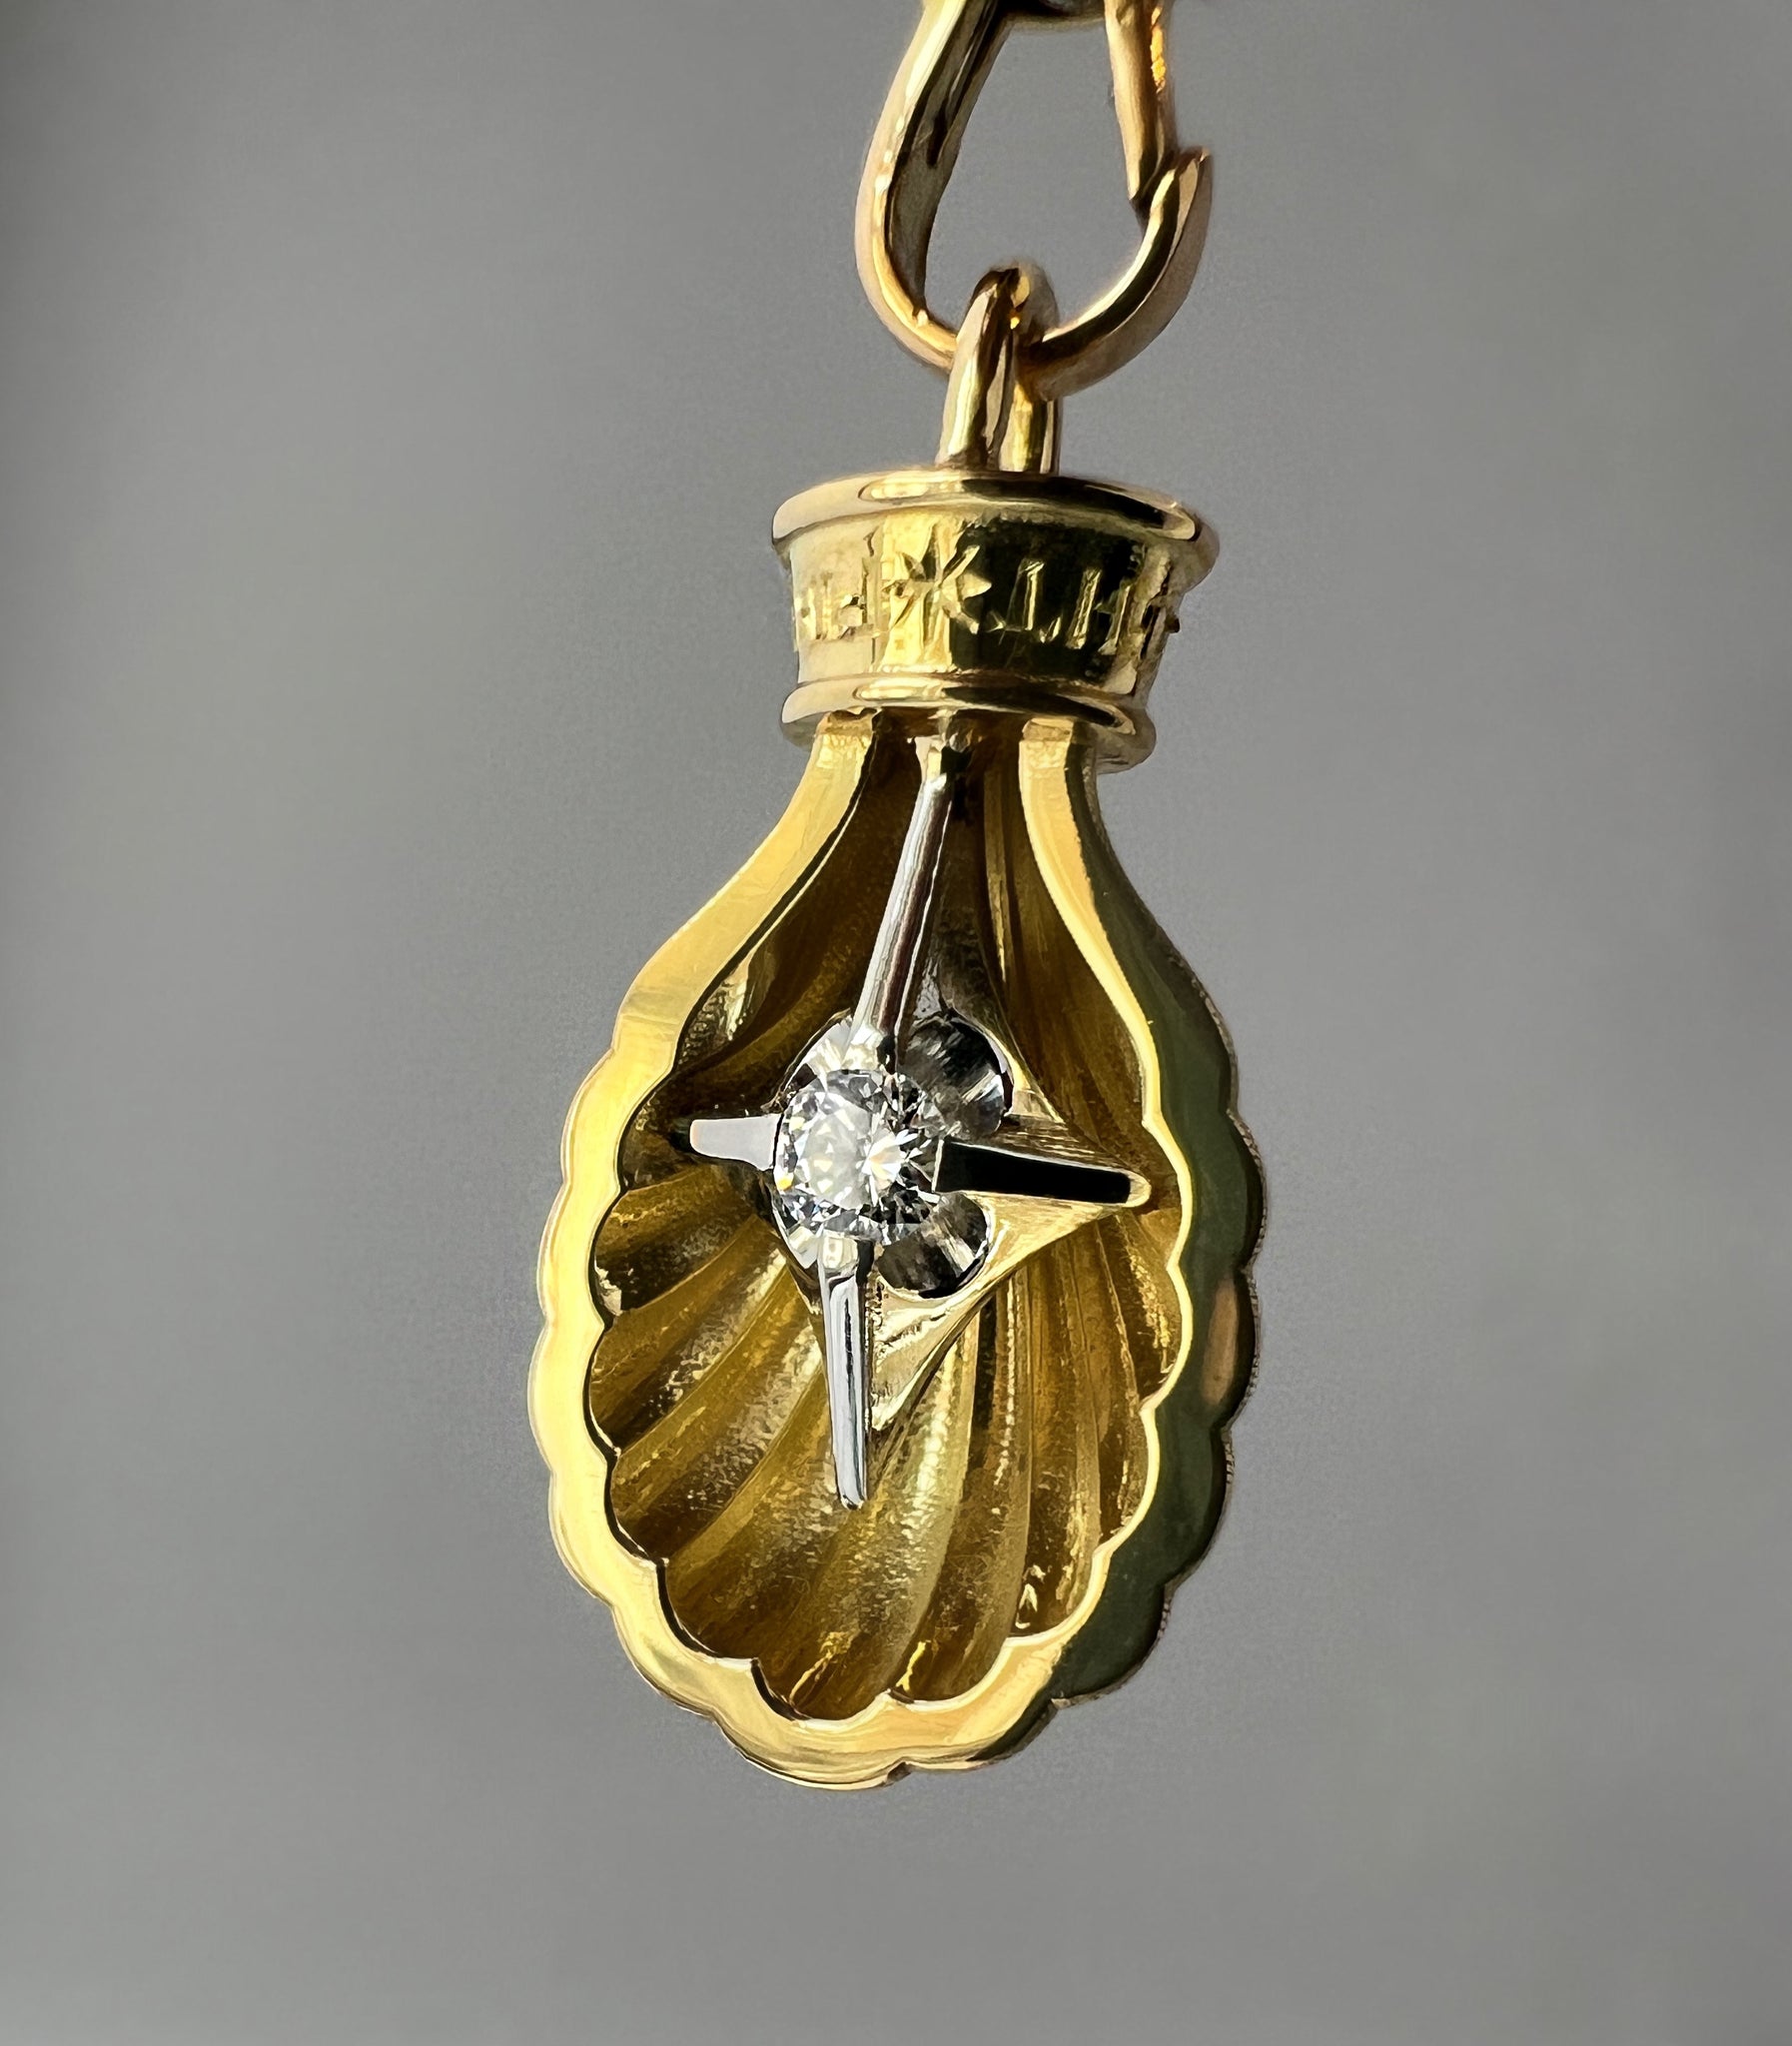 'Find your light' Pendant